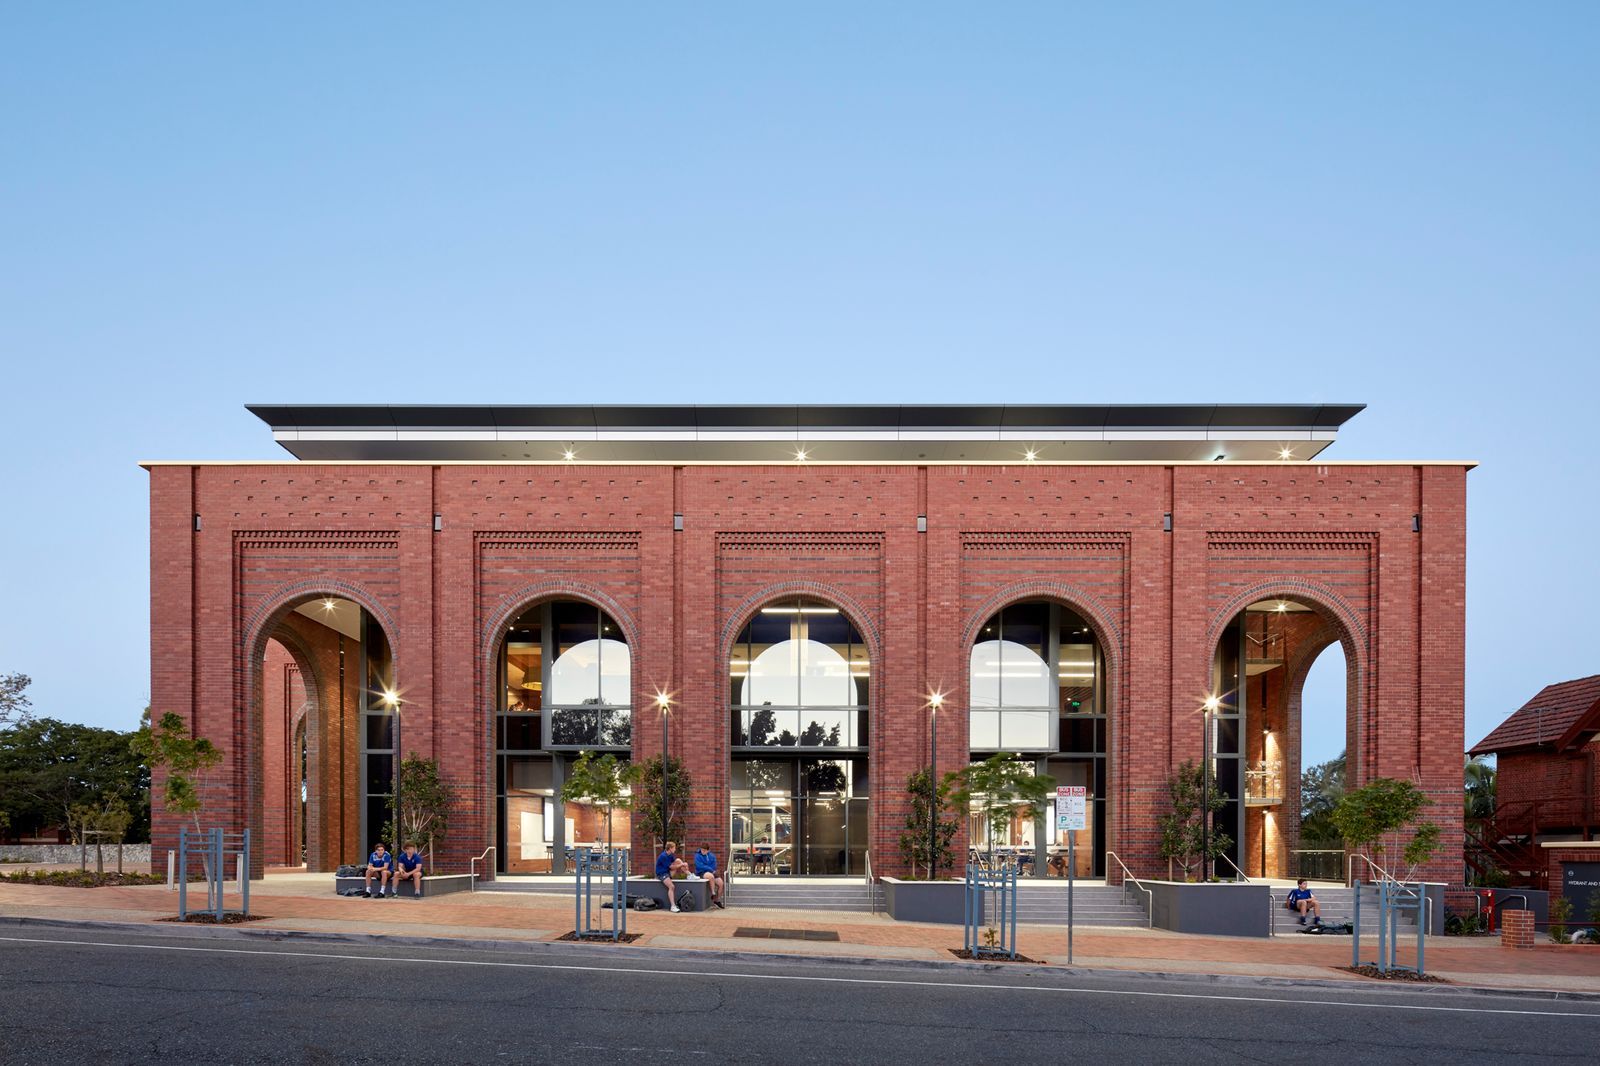 Anglican Church Grammar School Centenary Library by BSPN Architecture showing brick facade with arch openings